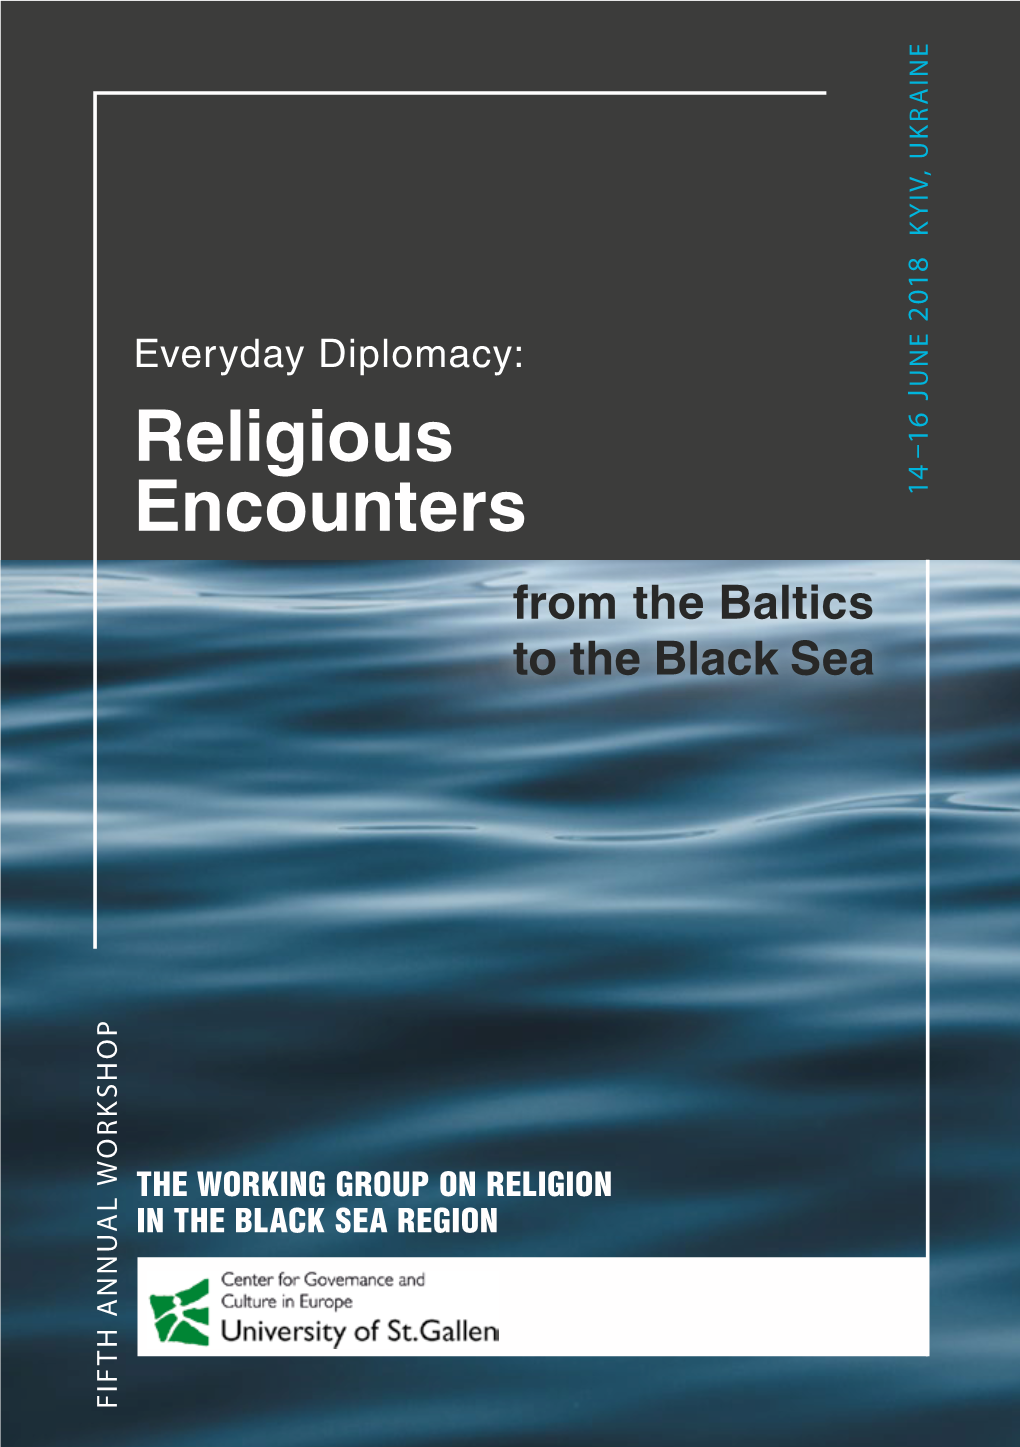 Religious Encounters from the Baltics to the Black Sea